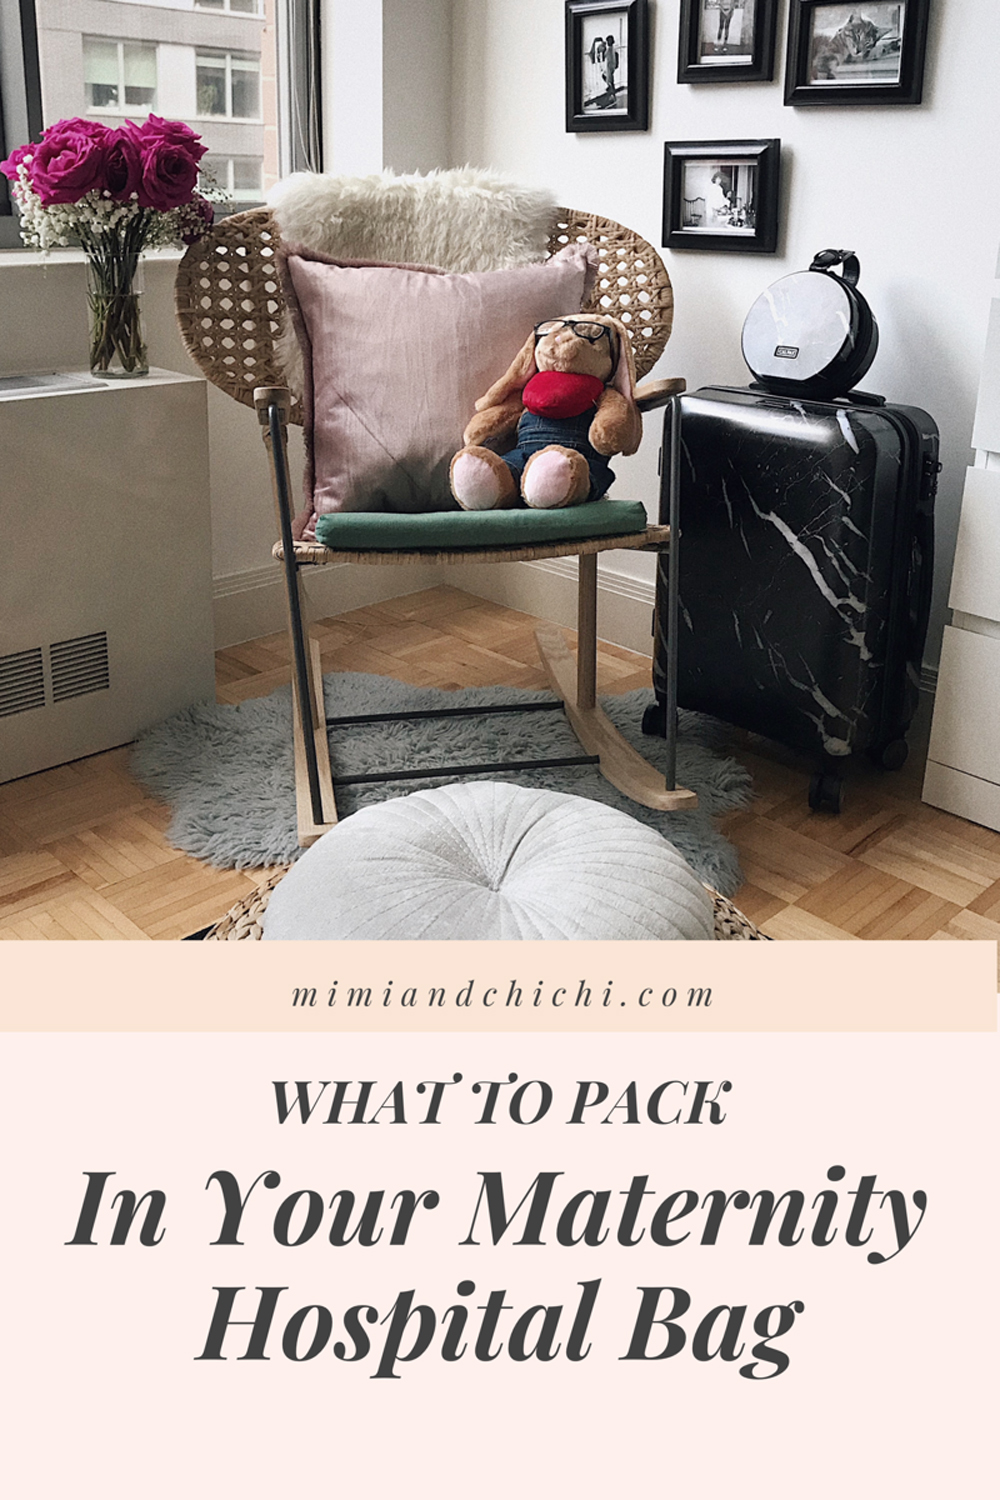 What to Pack in Your Maternity Hospital Bag